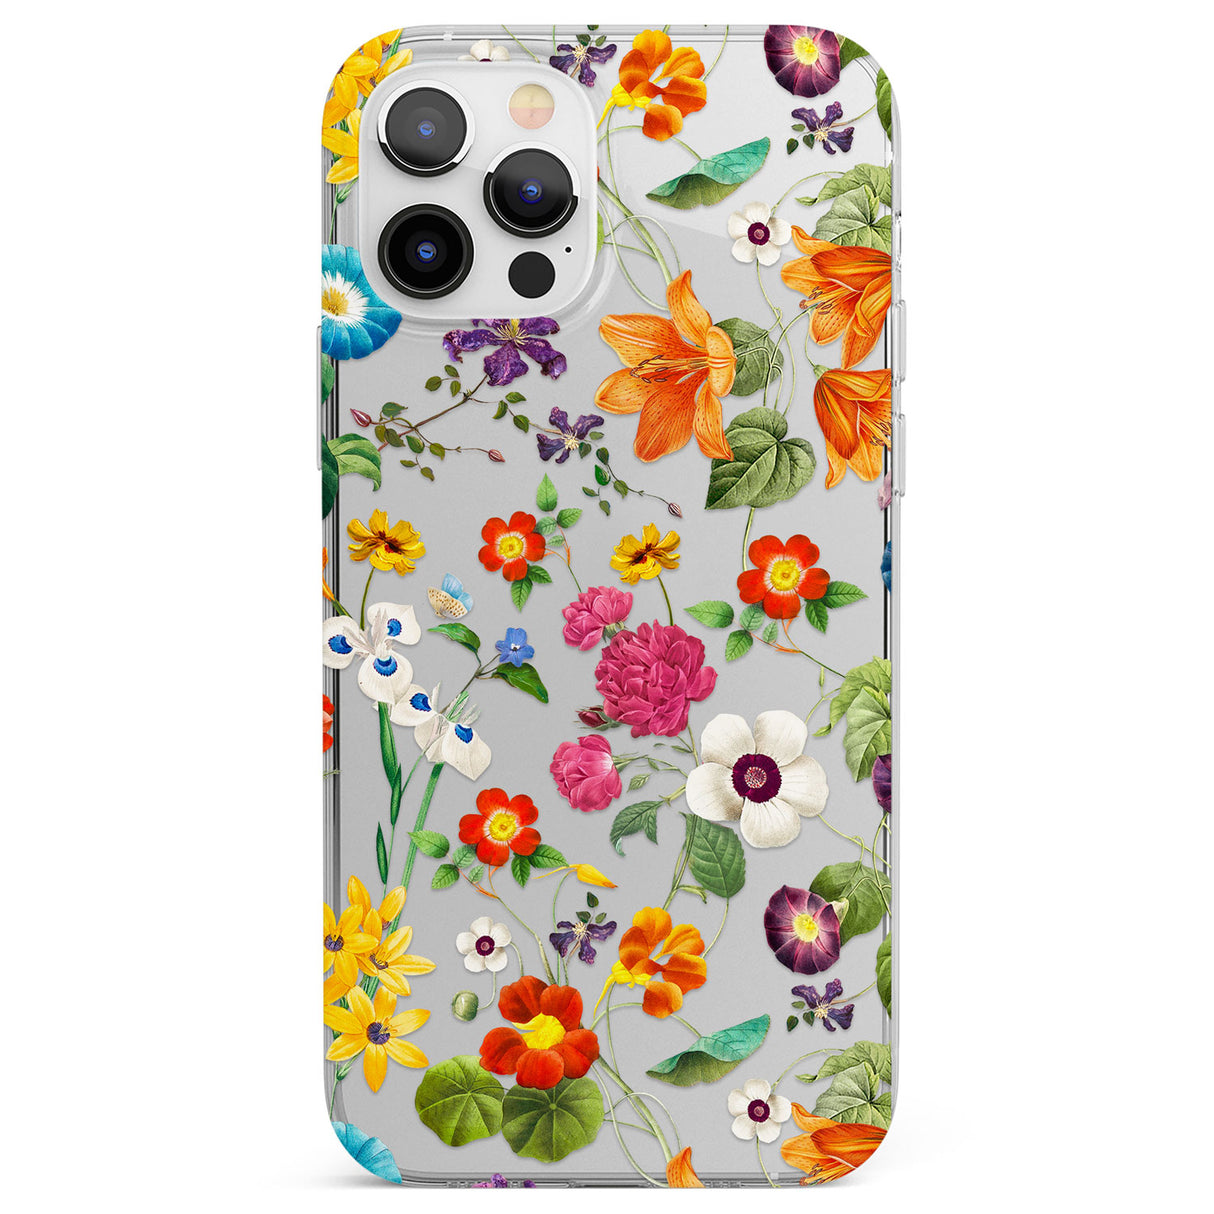 Whimsical Wildflowers Phone Case for iPhone 12 Pro